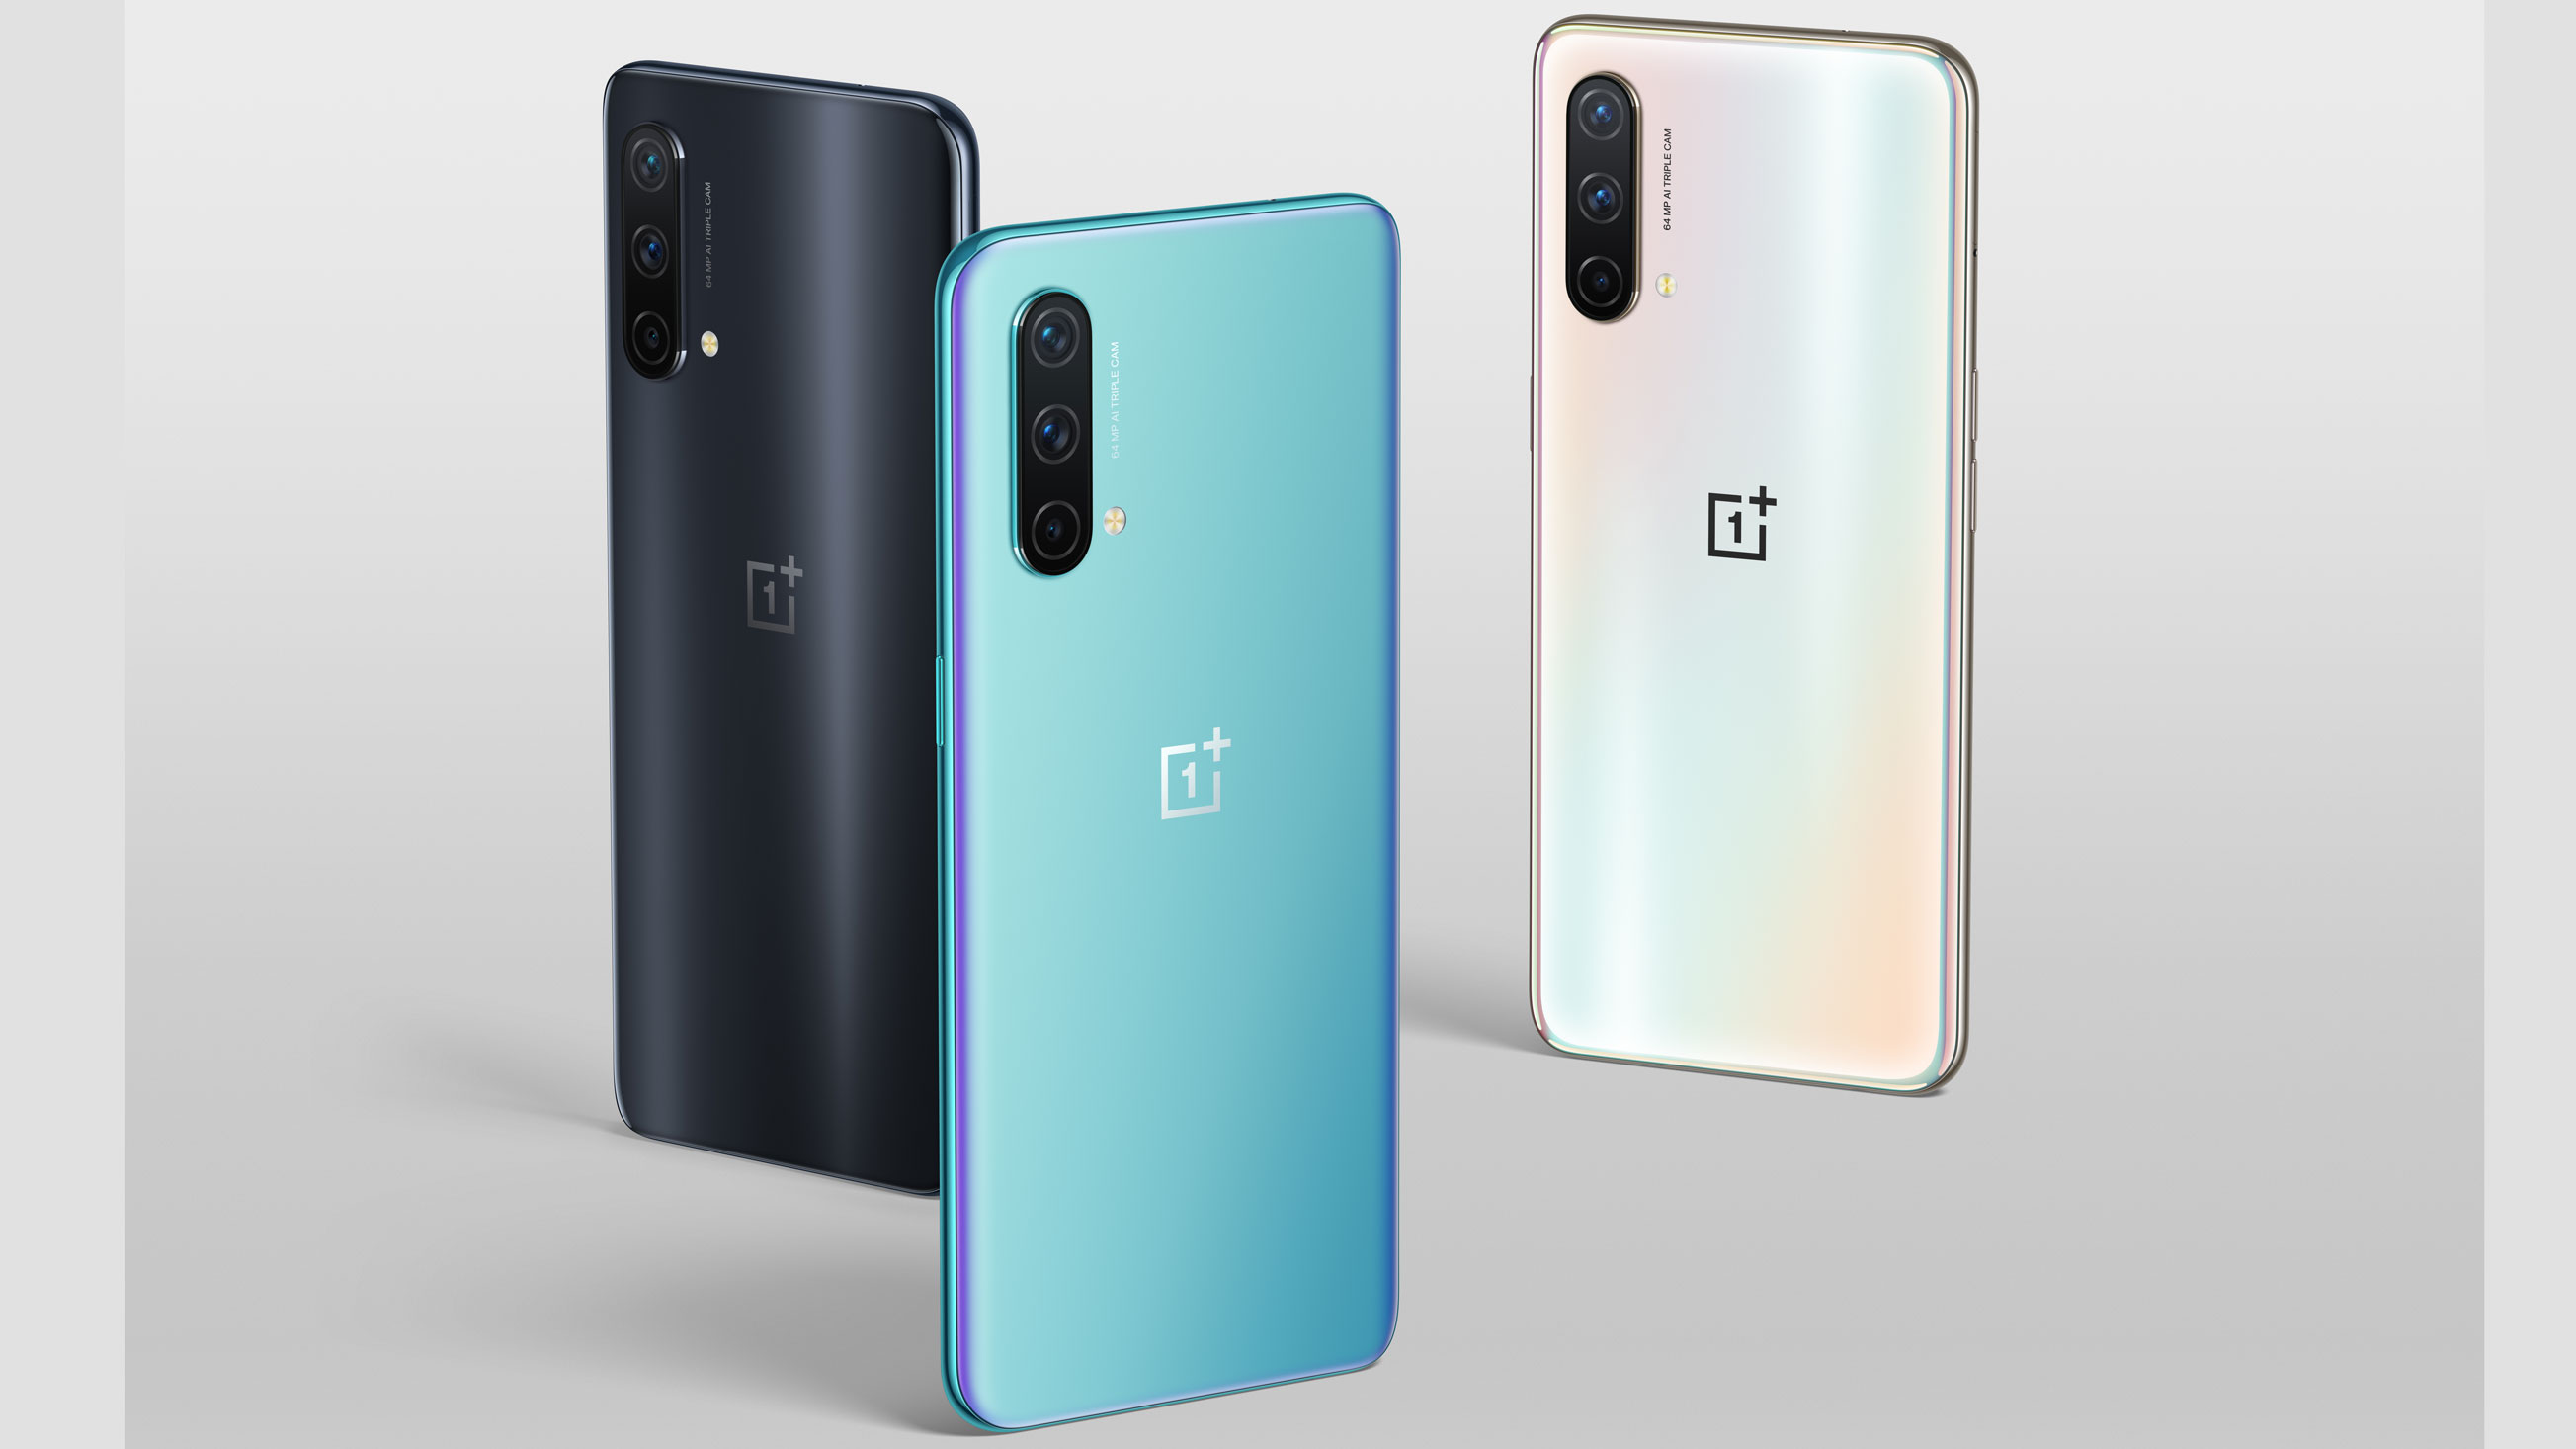 OnePlus Nord 5G - Smartphone 6.44 FHD+ AMOLED 90Hz (Snapdragon